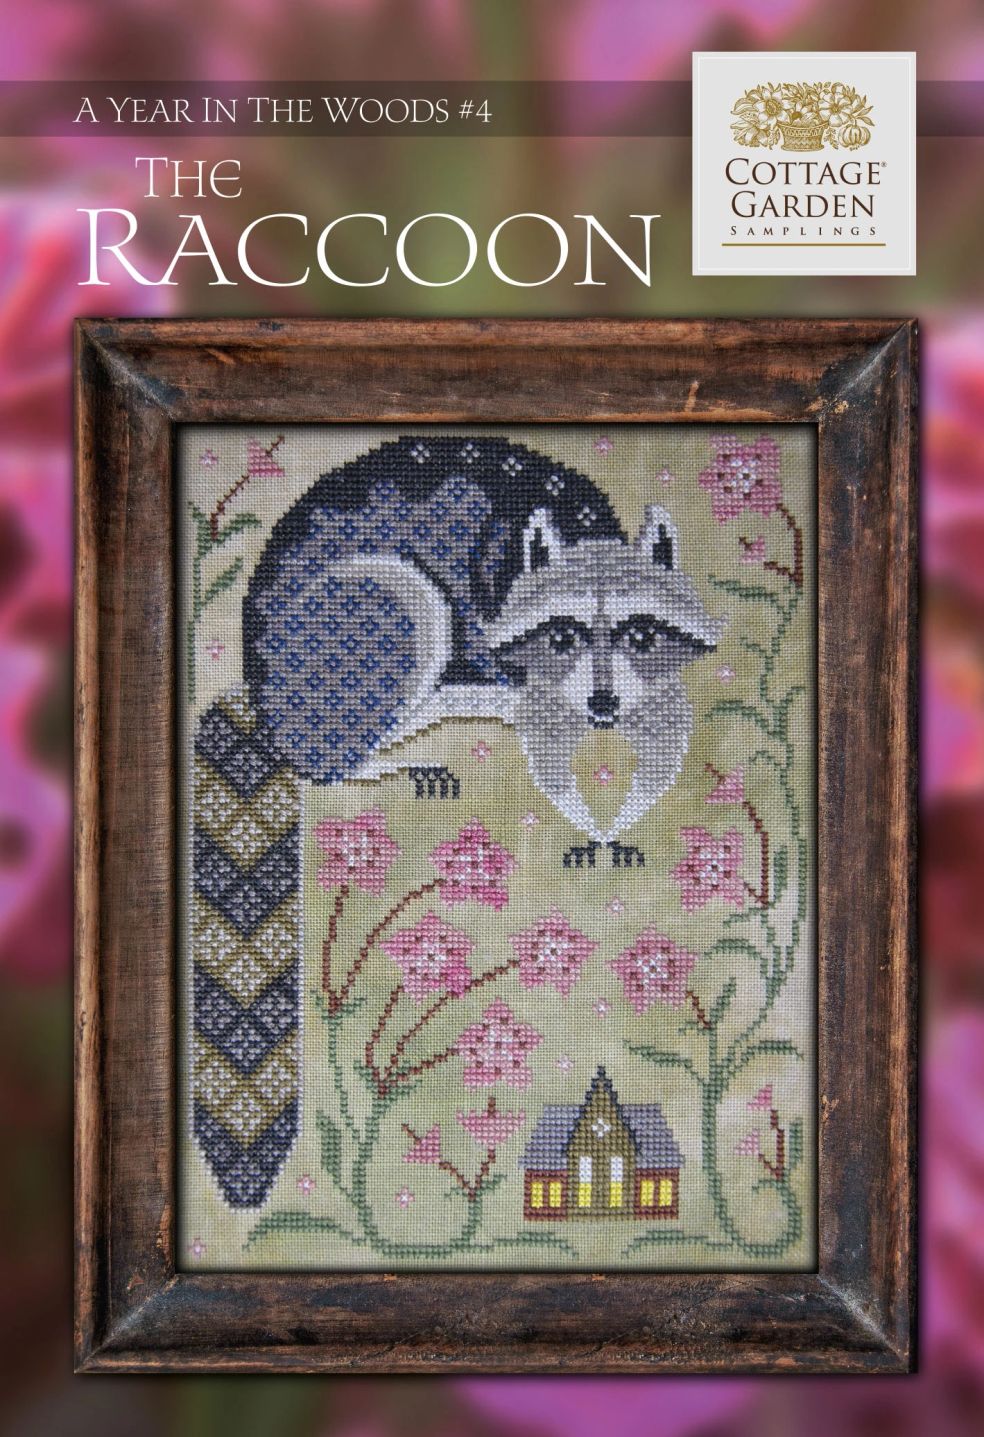 A Year in the Woods - Series 4 - The Raccoon by Cottage Garden Samplings 